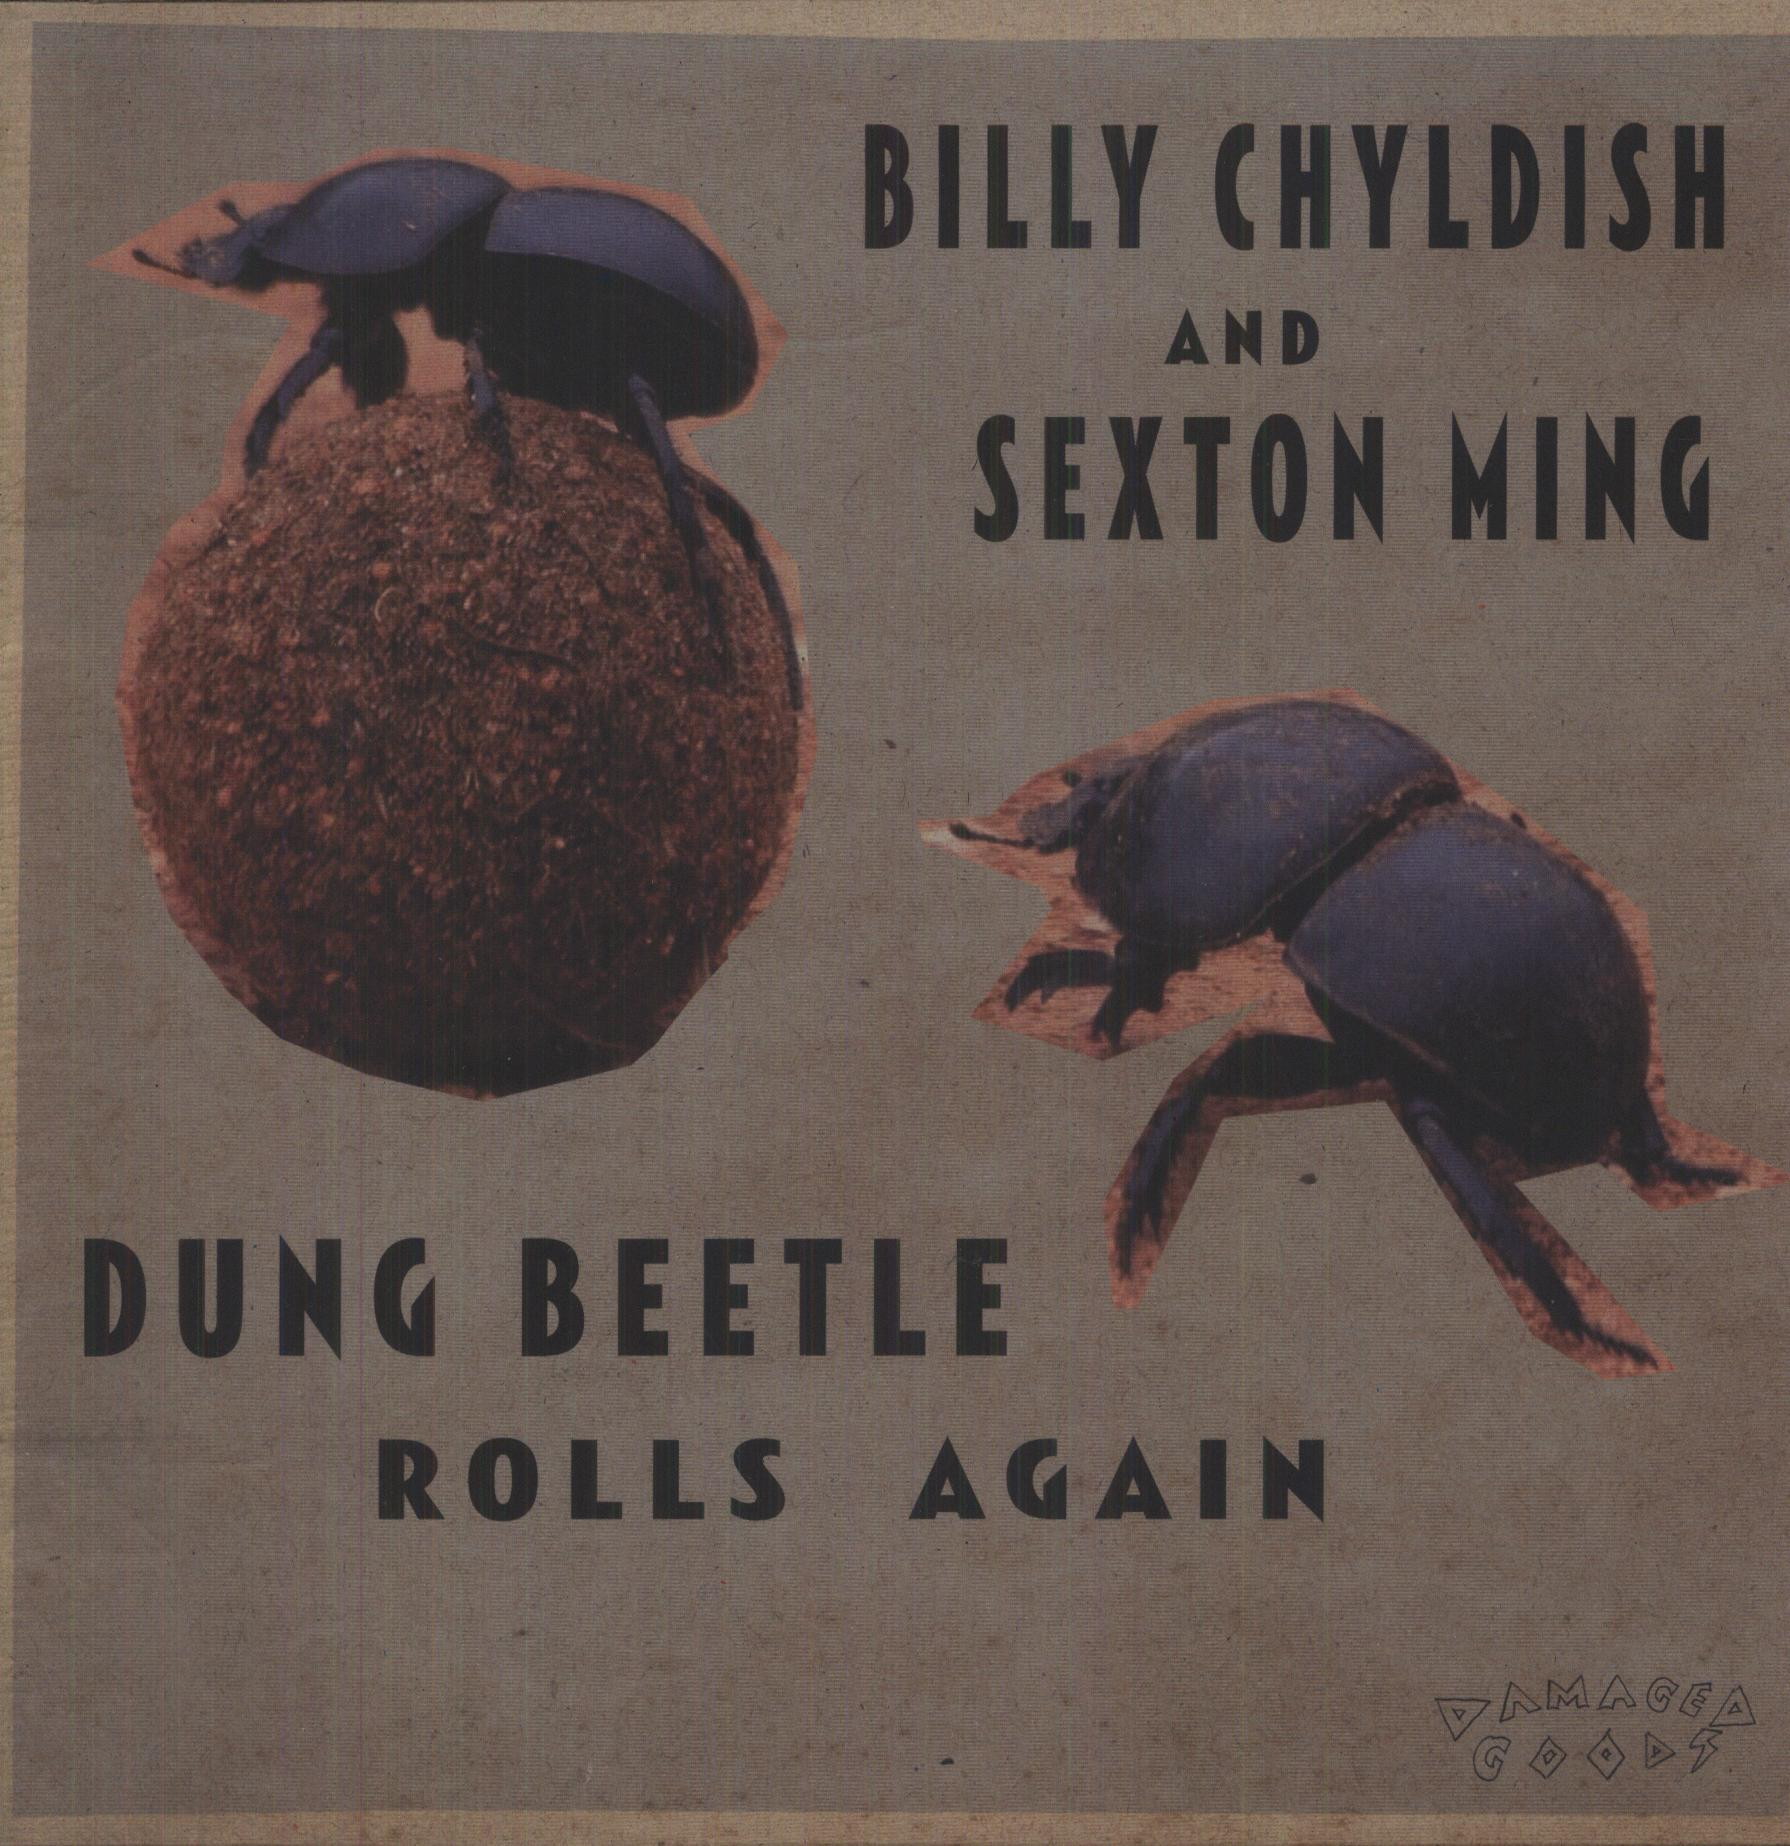 DUNG BEETLE ROLLS AGAIN